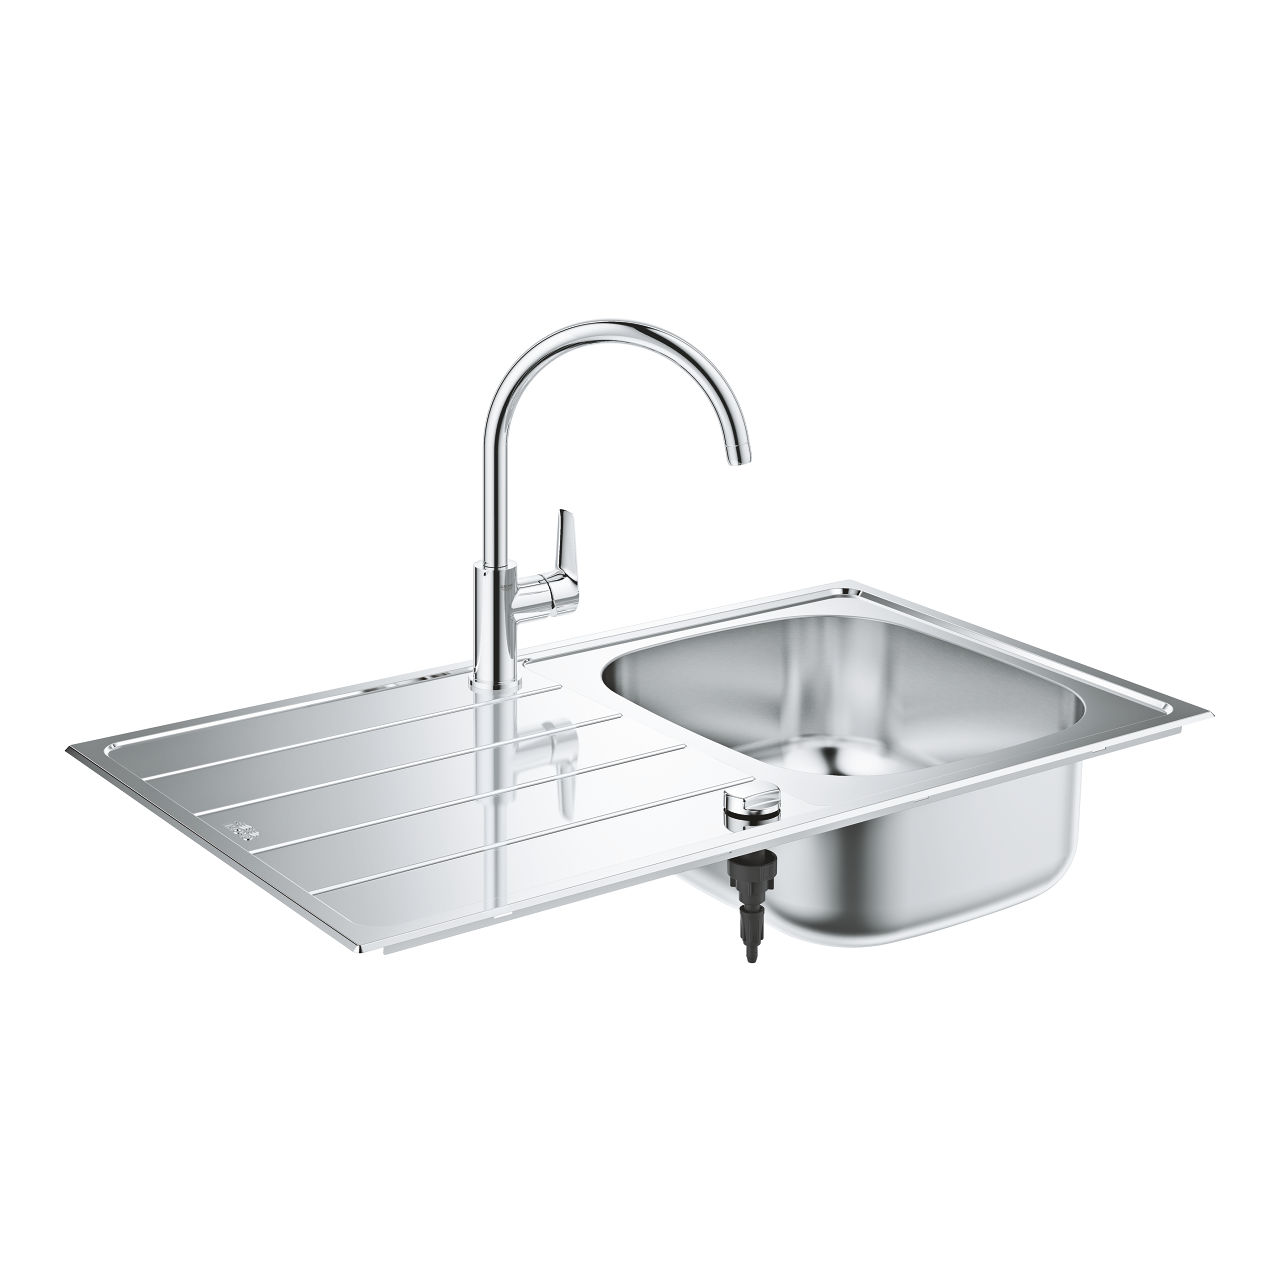 Grohe built-in sink set 31562SD1 86x50cm, 2000 , with single lev